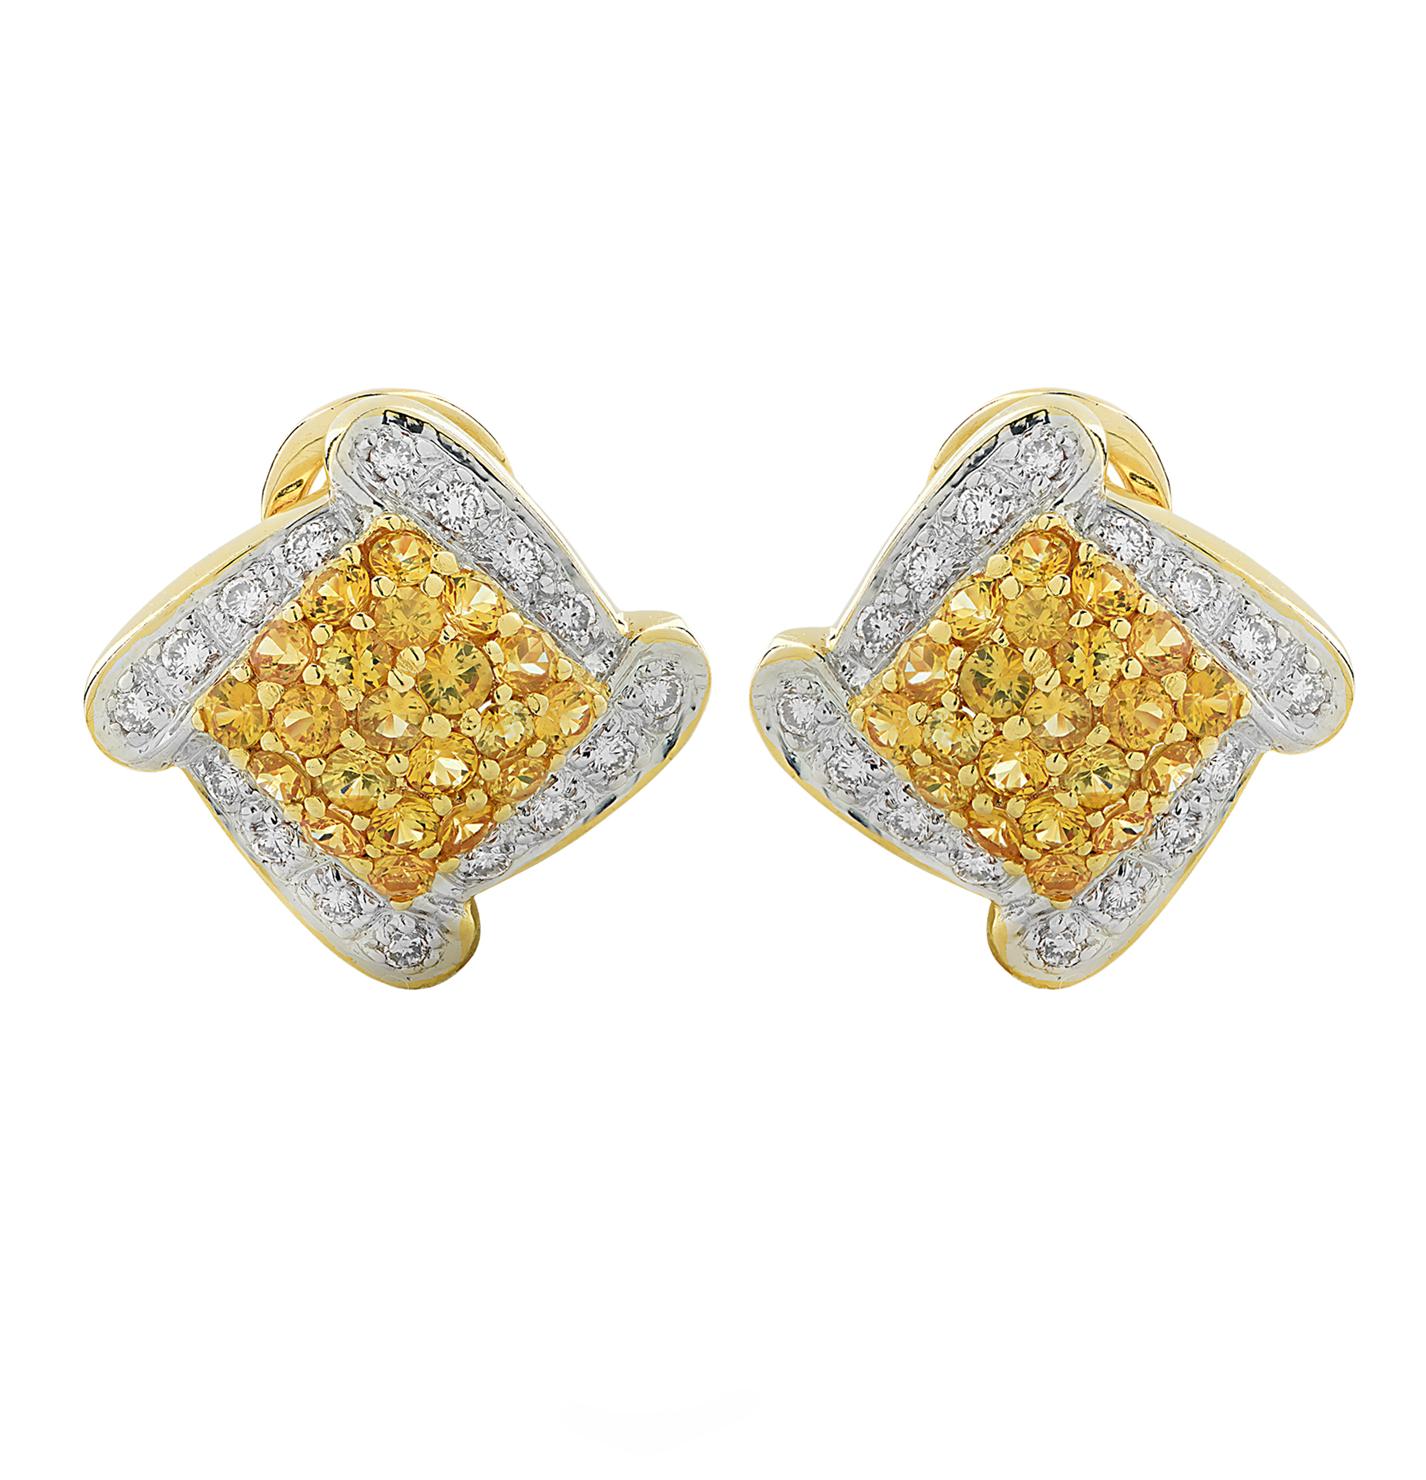 Beautiful earrings crafted in 18 karat yellow and white gold featuring approximately 42 yellow sapphires weighing approximately 1 carat total and 32 round brilliant cut diamonds weighing approximately .25 carats total, G color, VS clarity. Yellow